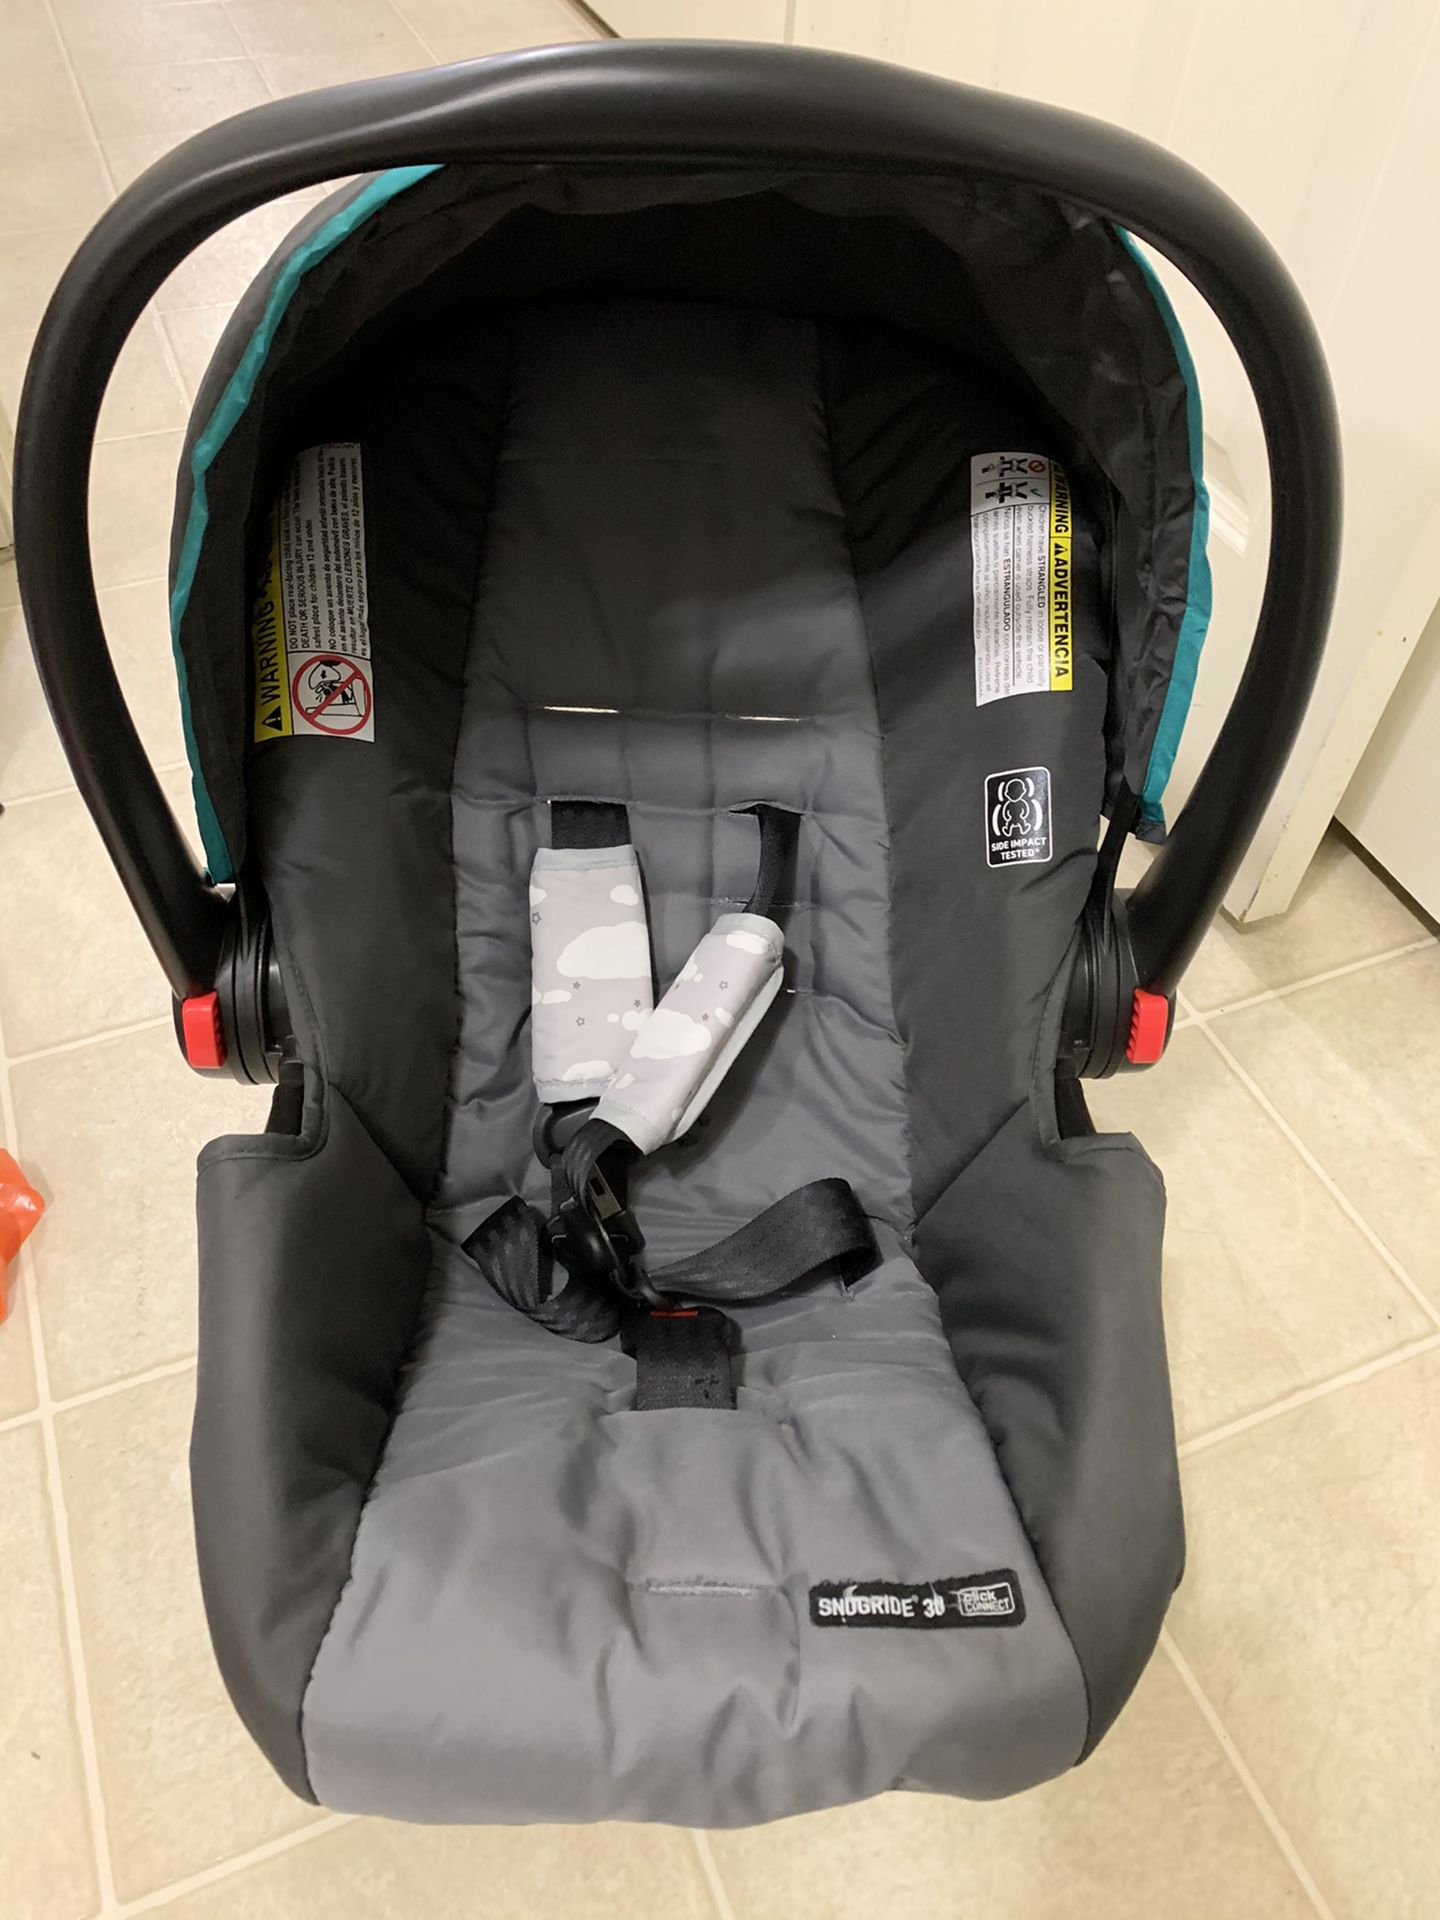 Baby car seat with stroller